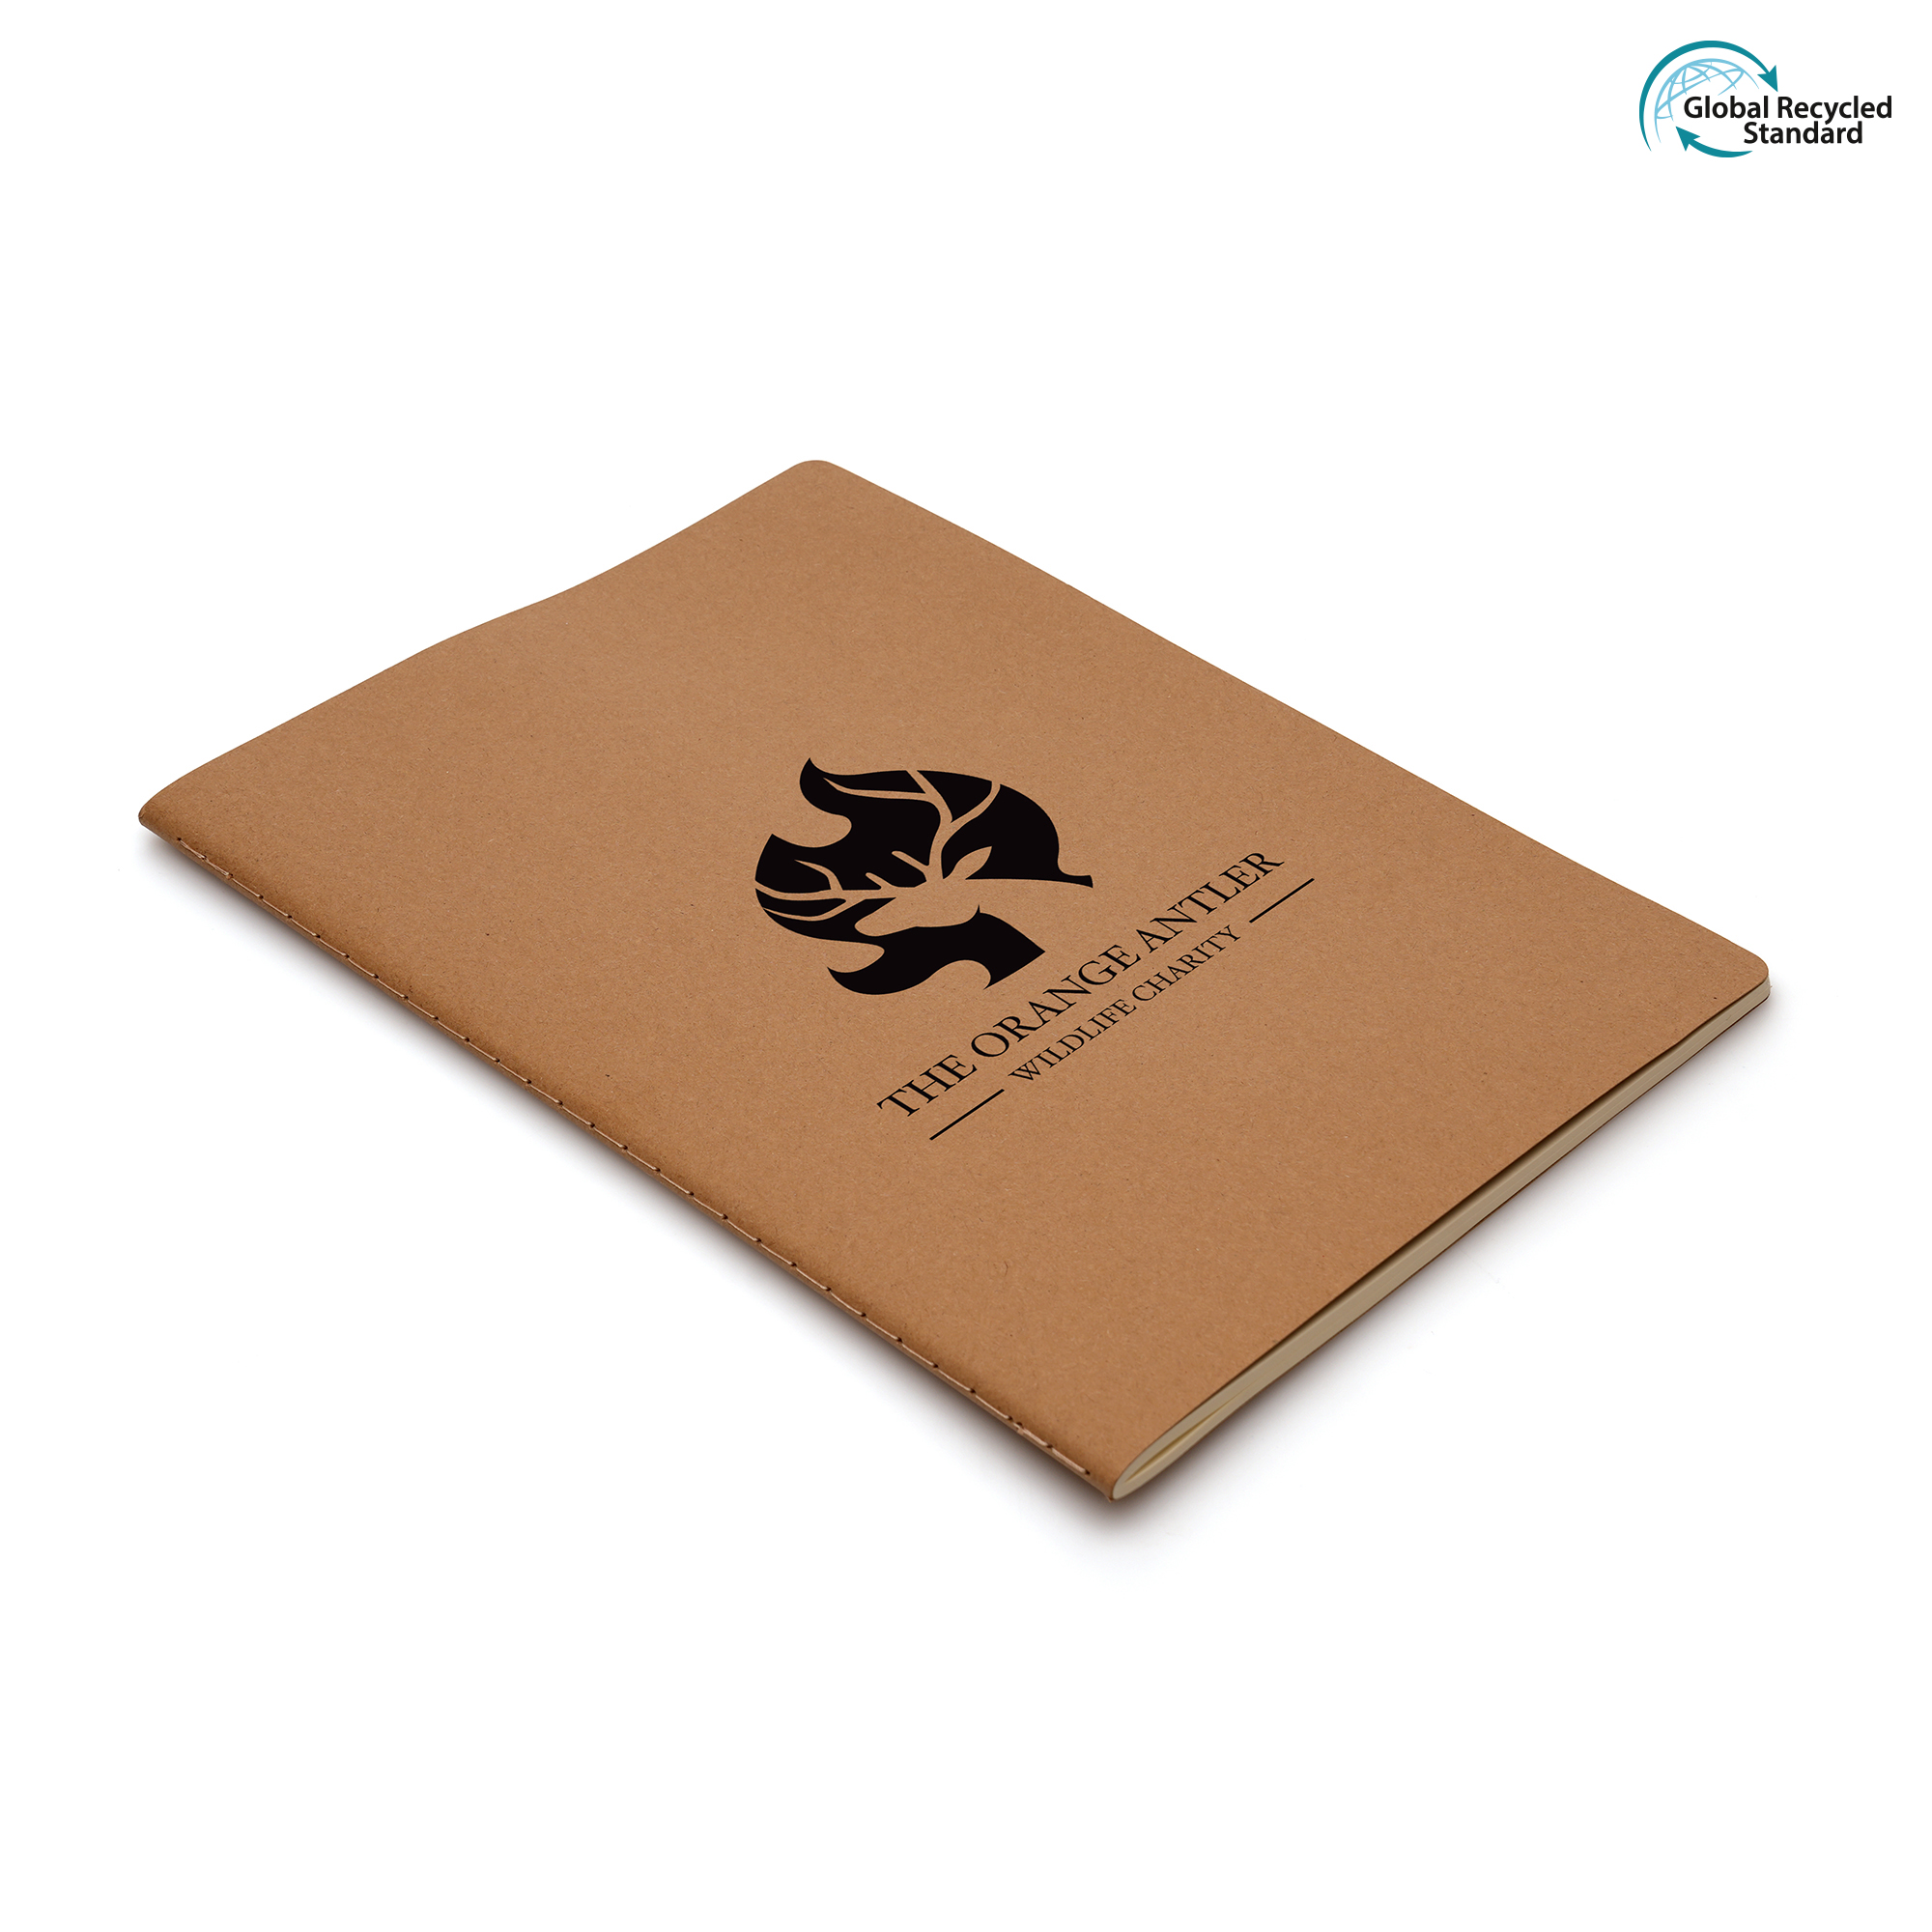 B6 100% recycled Kraft paper graphic notebook, with 40 recycled lined sheets inside and fully customisable cover.